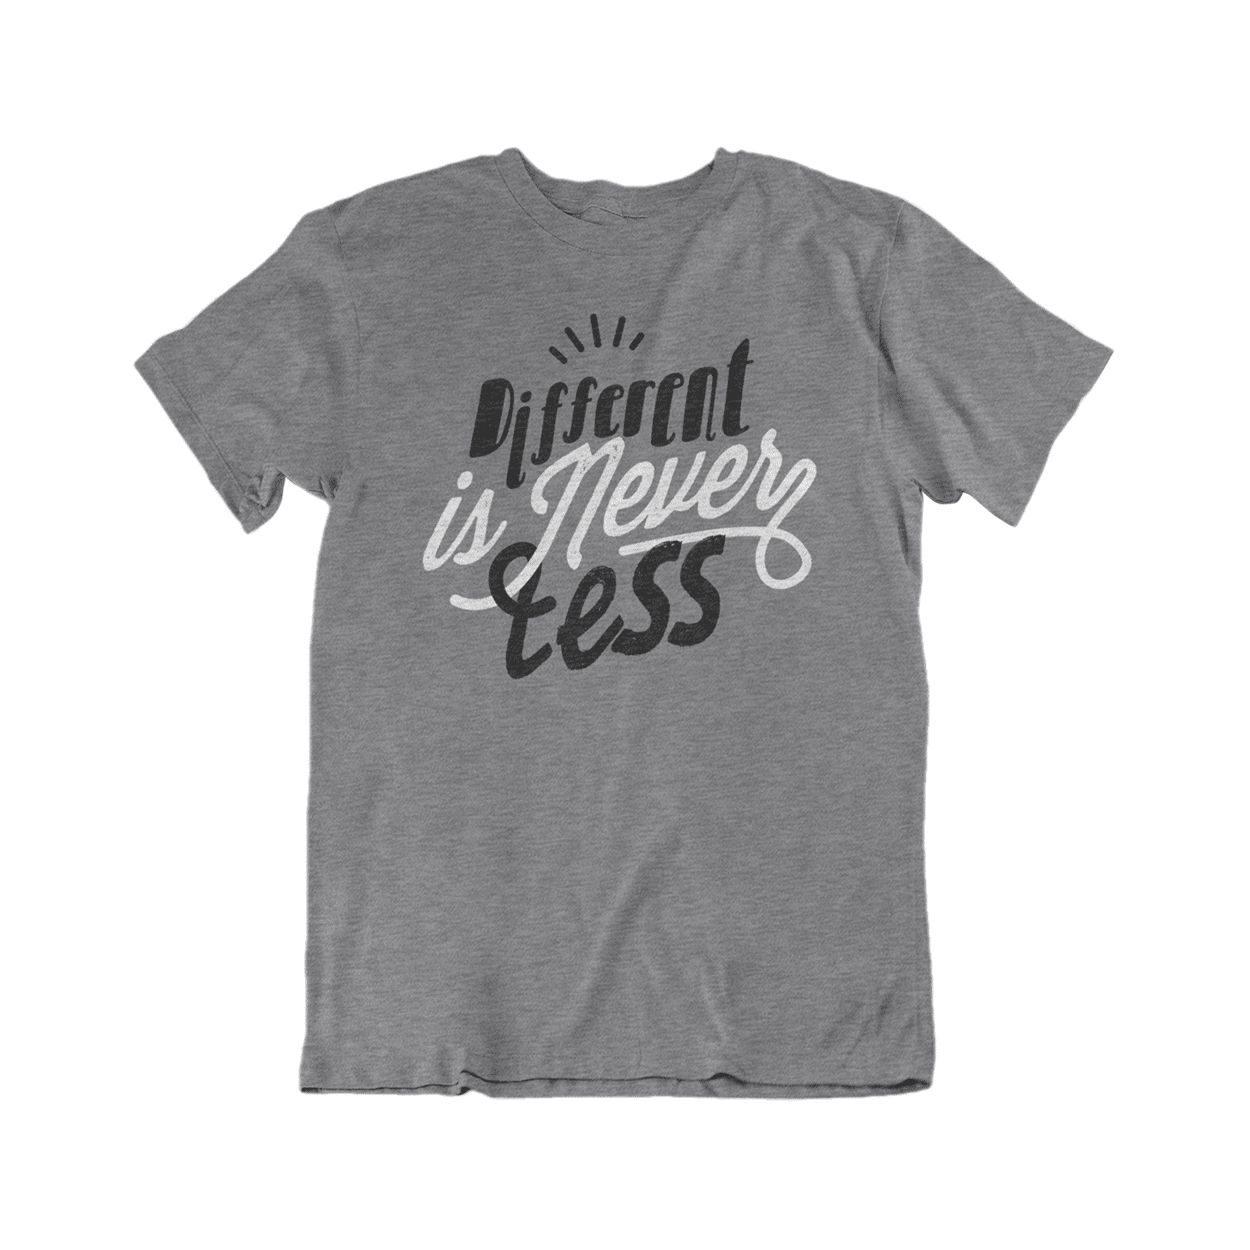 Less Shout – Go Never Love is Different Youth - Tee